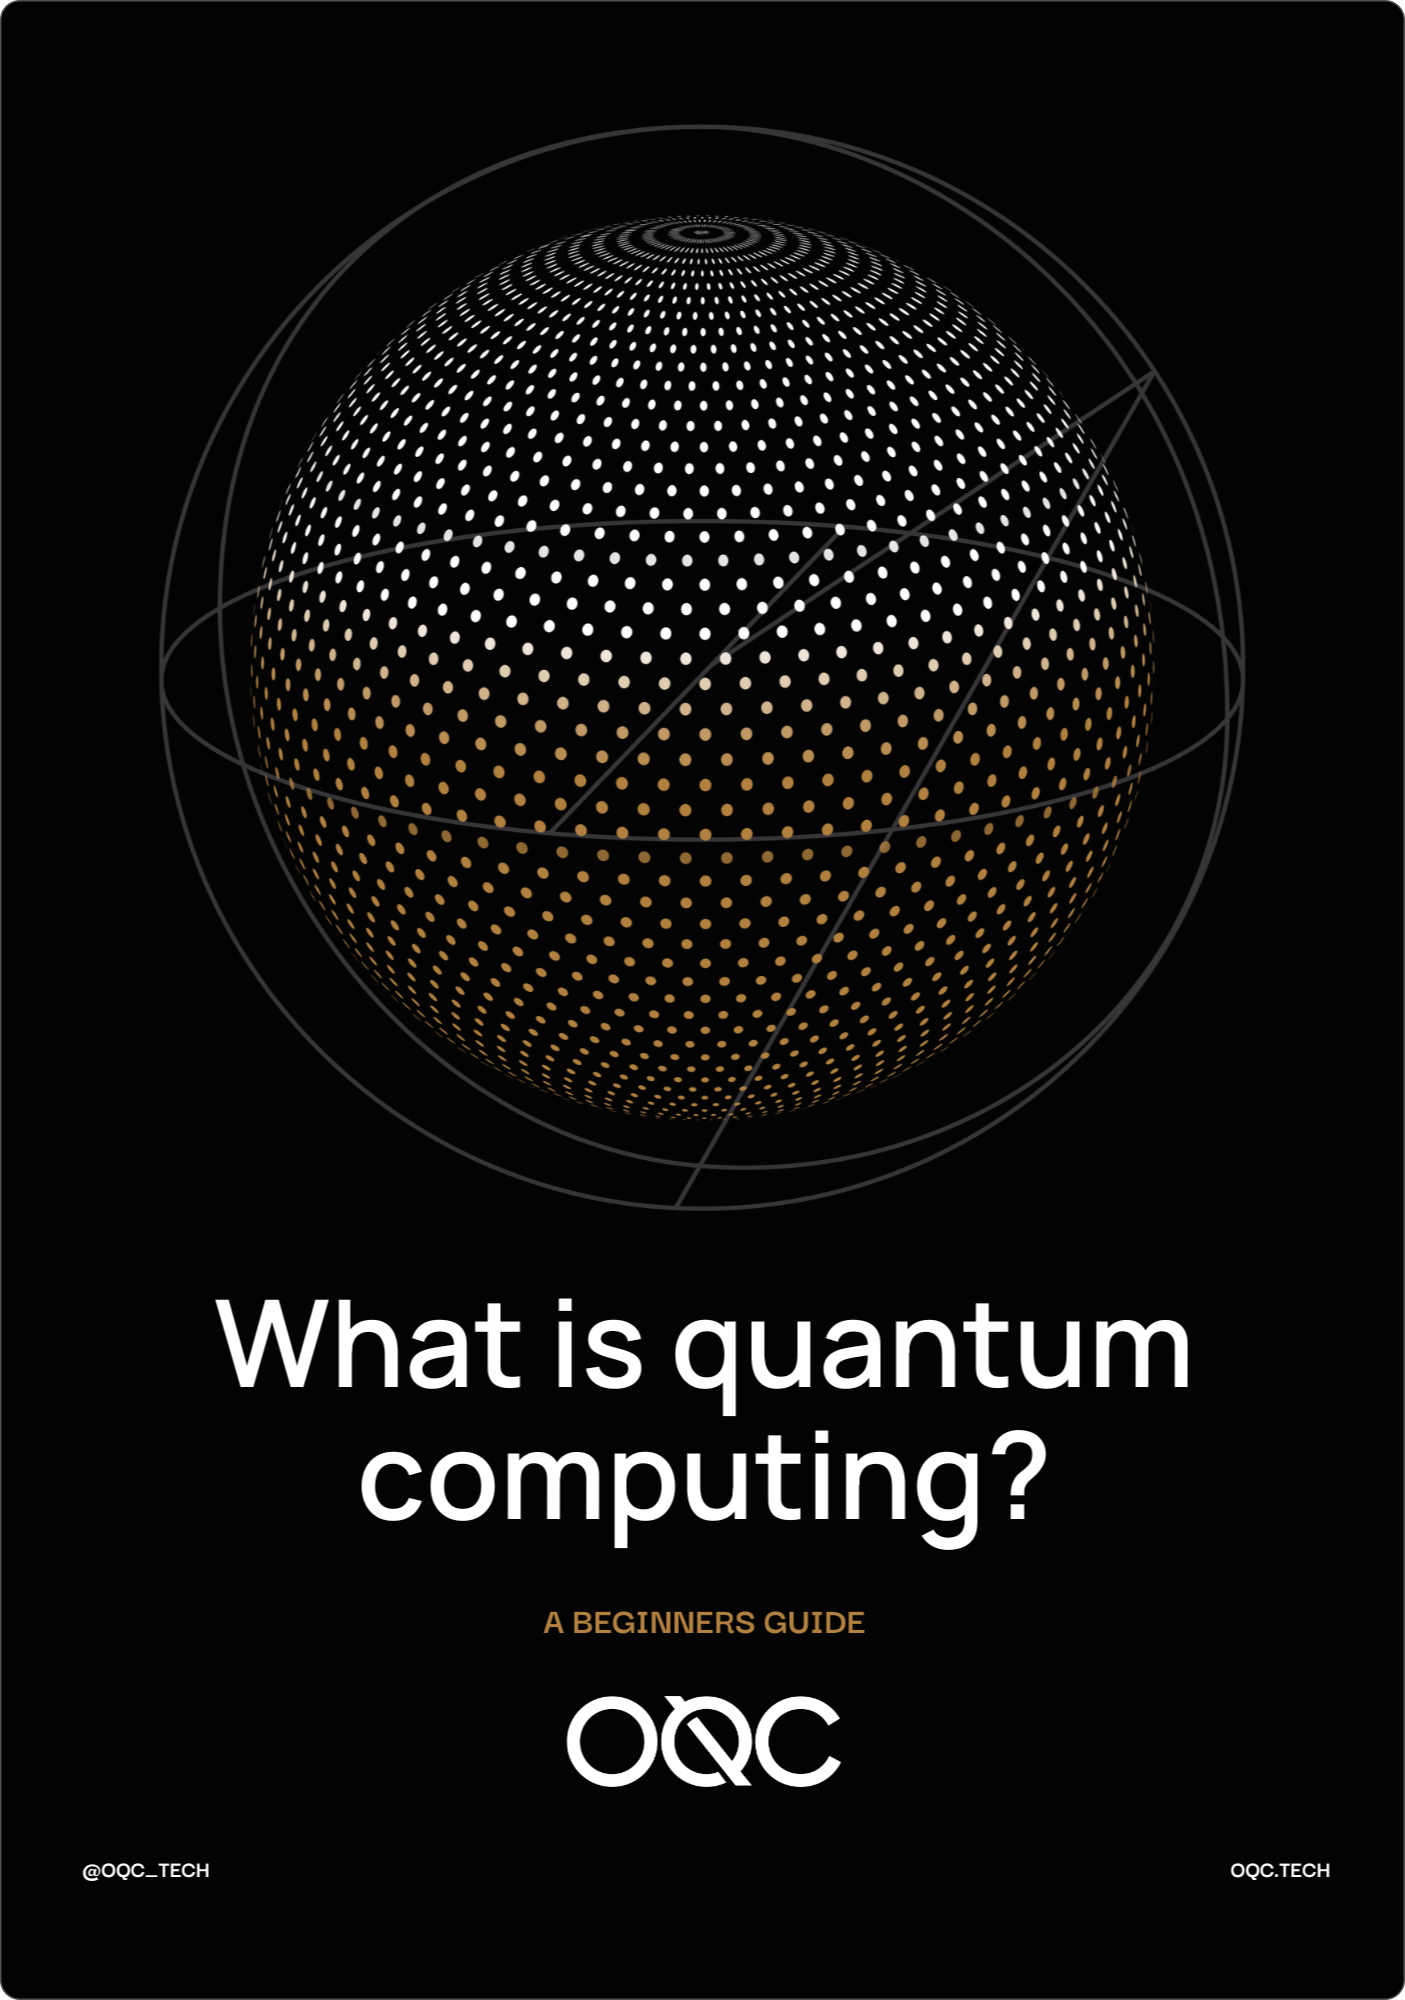 Image black background, drawing of a sphere with quantum dots. Text on image reads: What is quantum